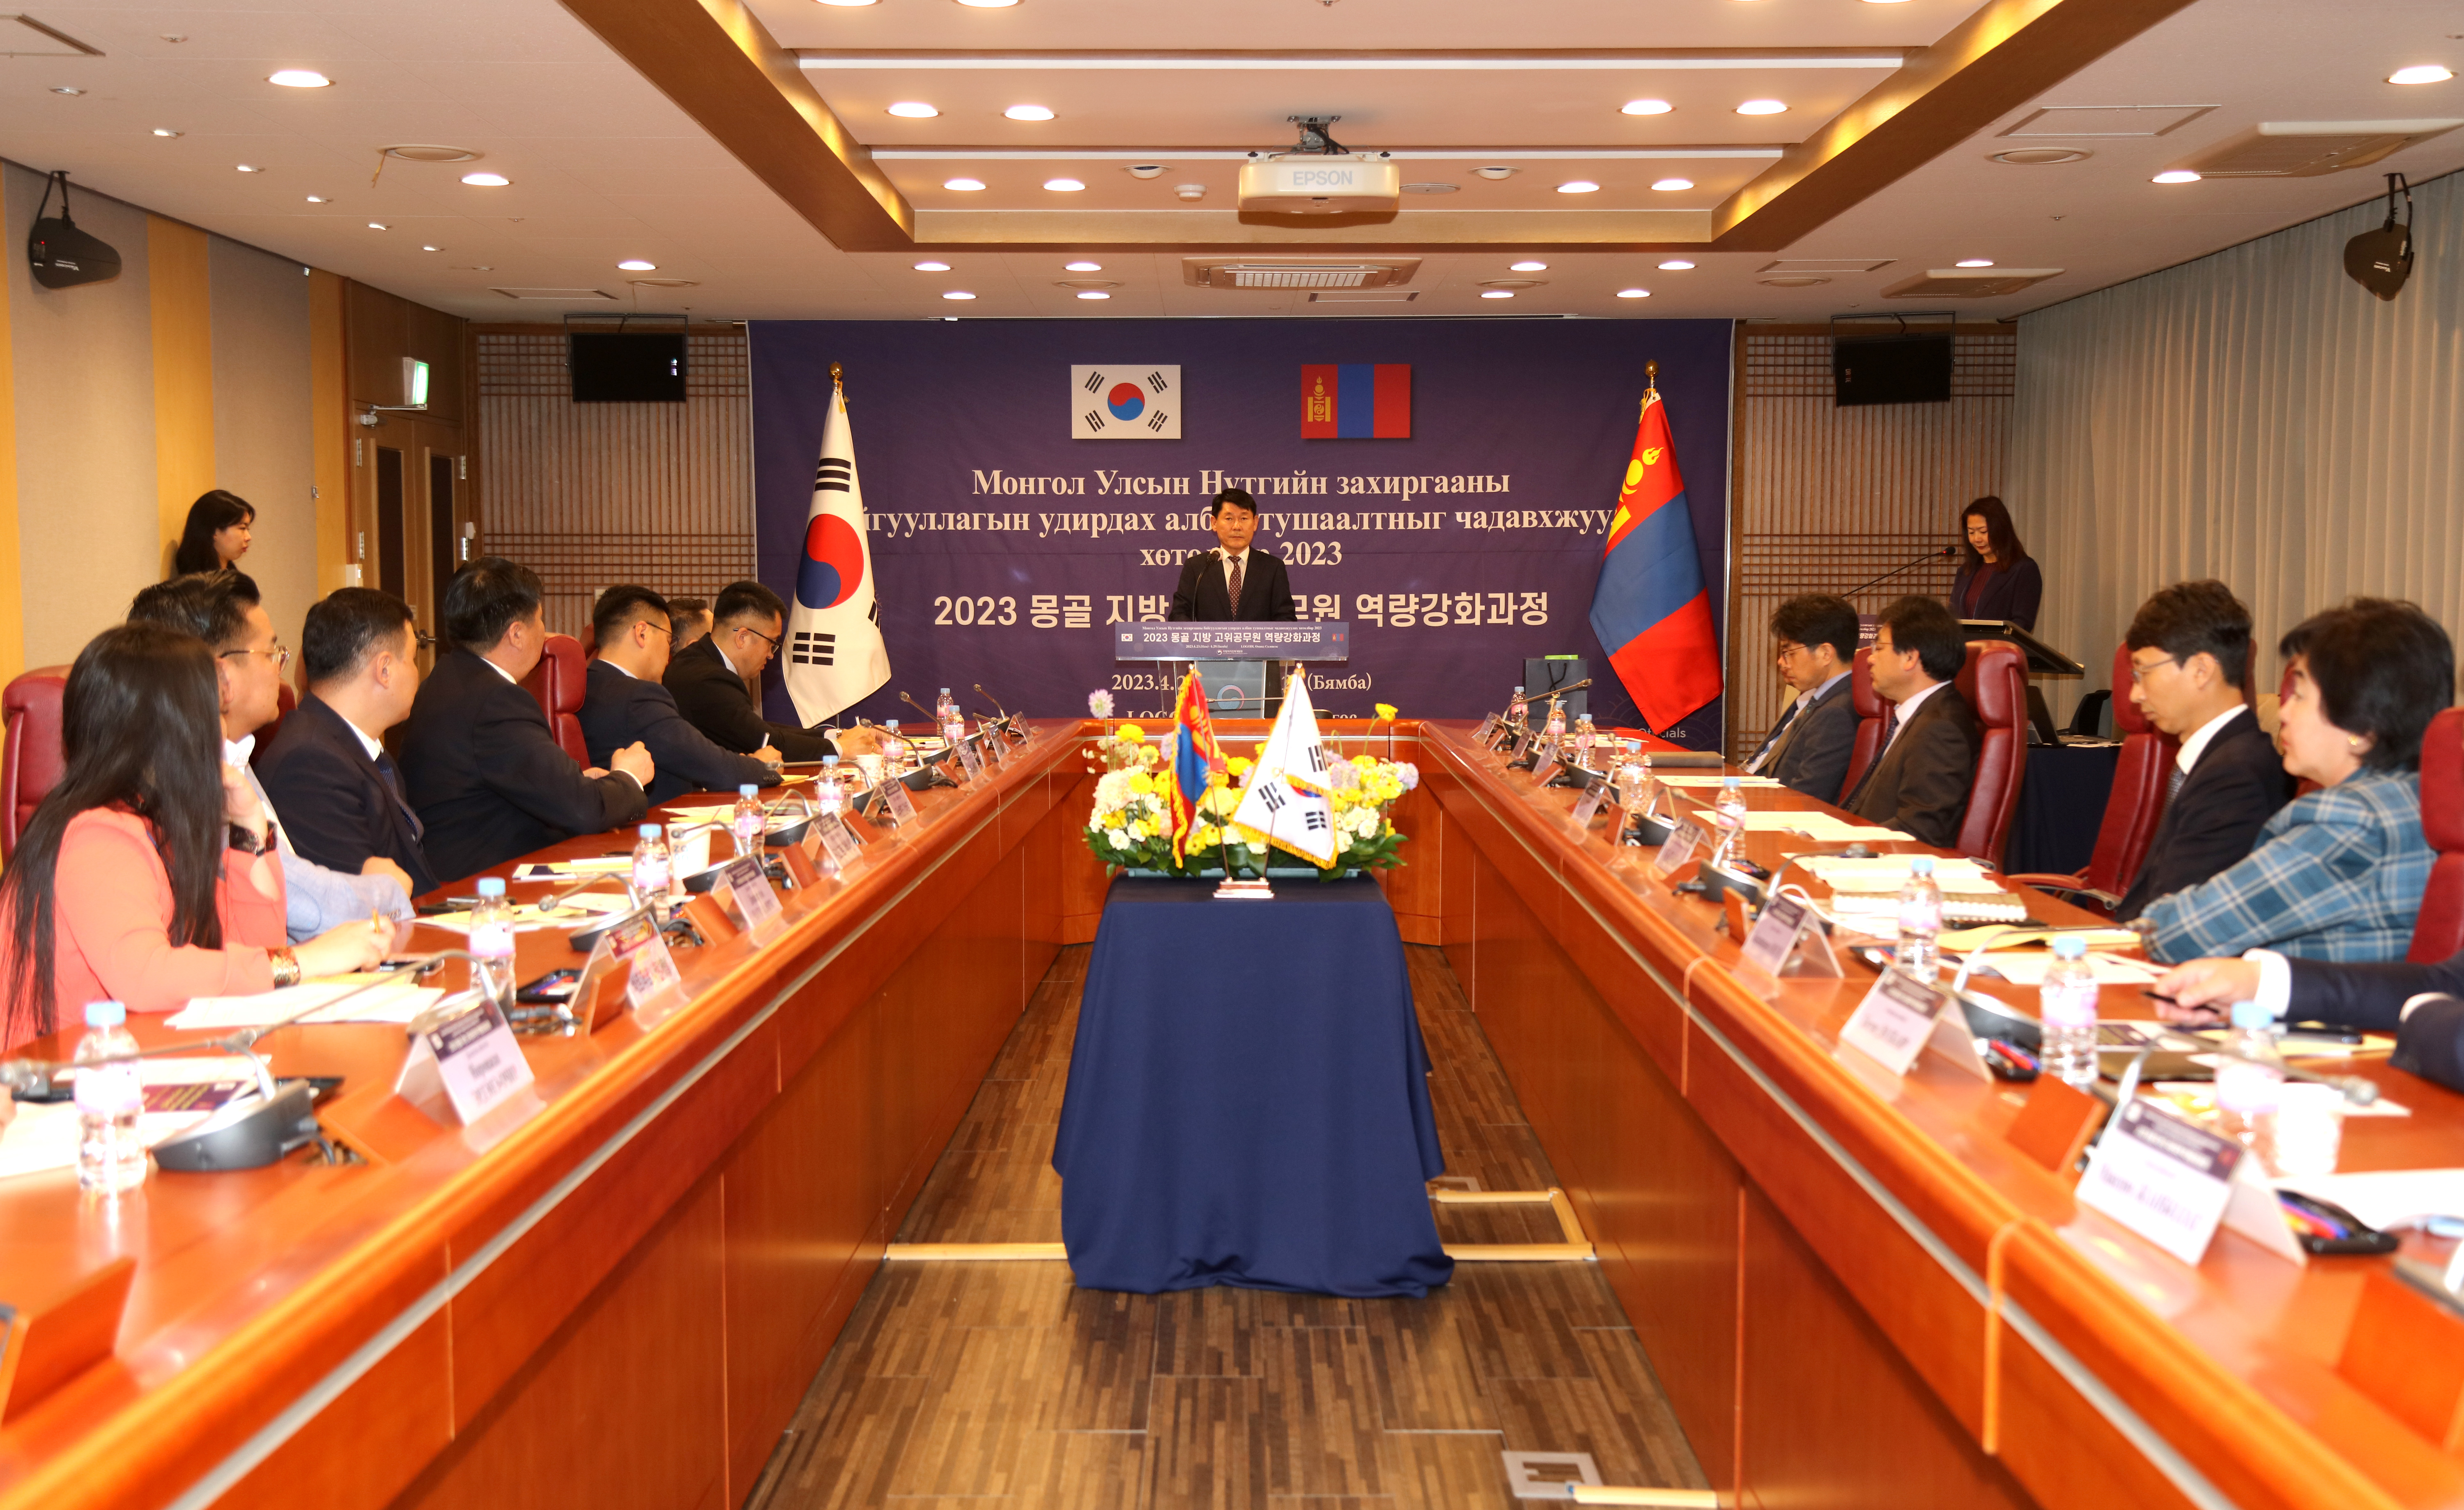 Mongolian Officials Prepare to Improve Public Service by Sharing Korea's Cases.